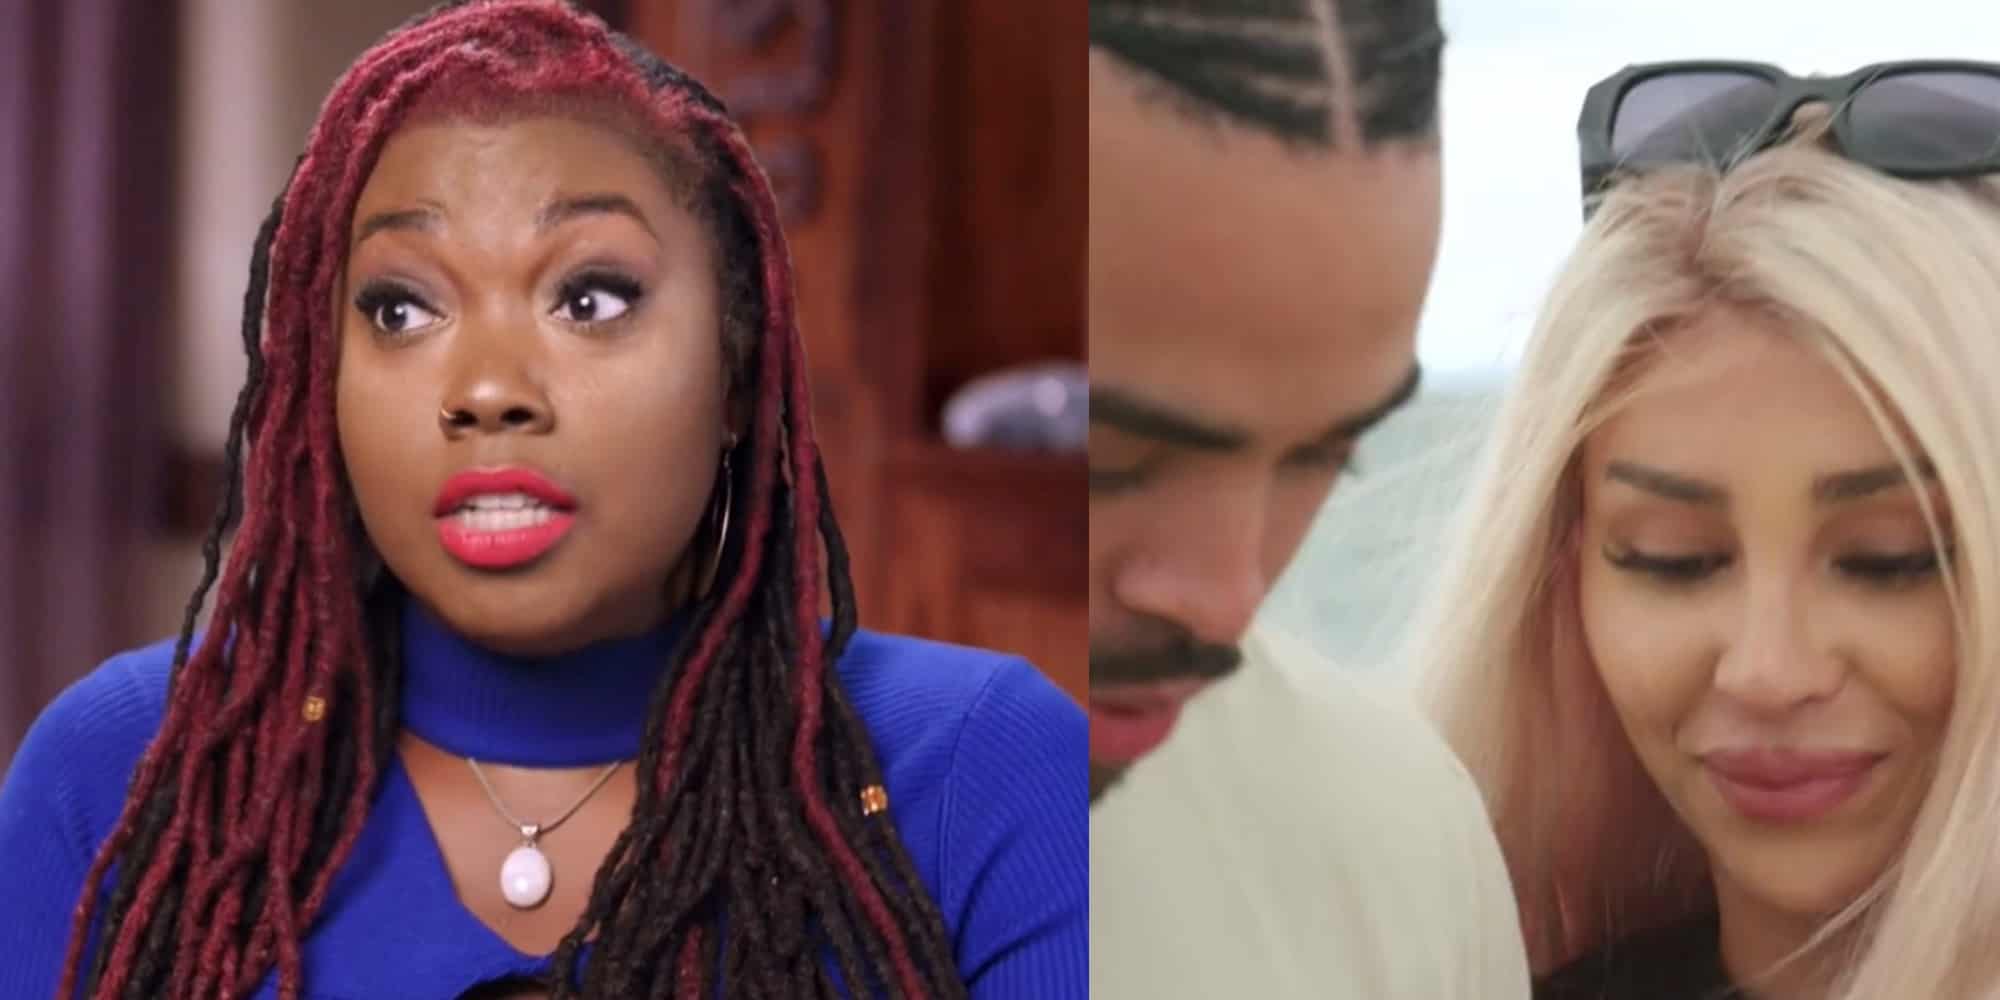 90 Day Fiancé Season 10 Episode 2: Release Date, Spoilers & Where To Watch